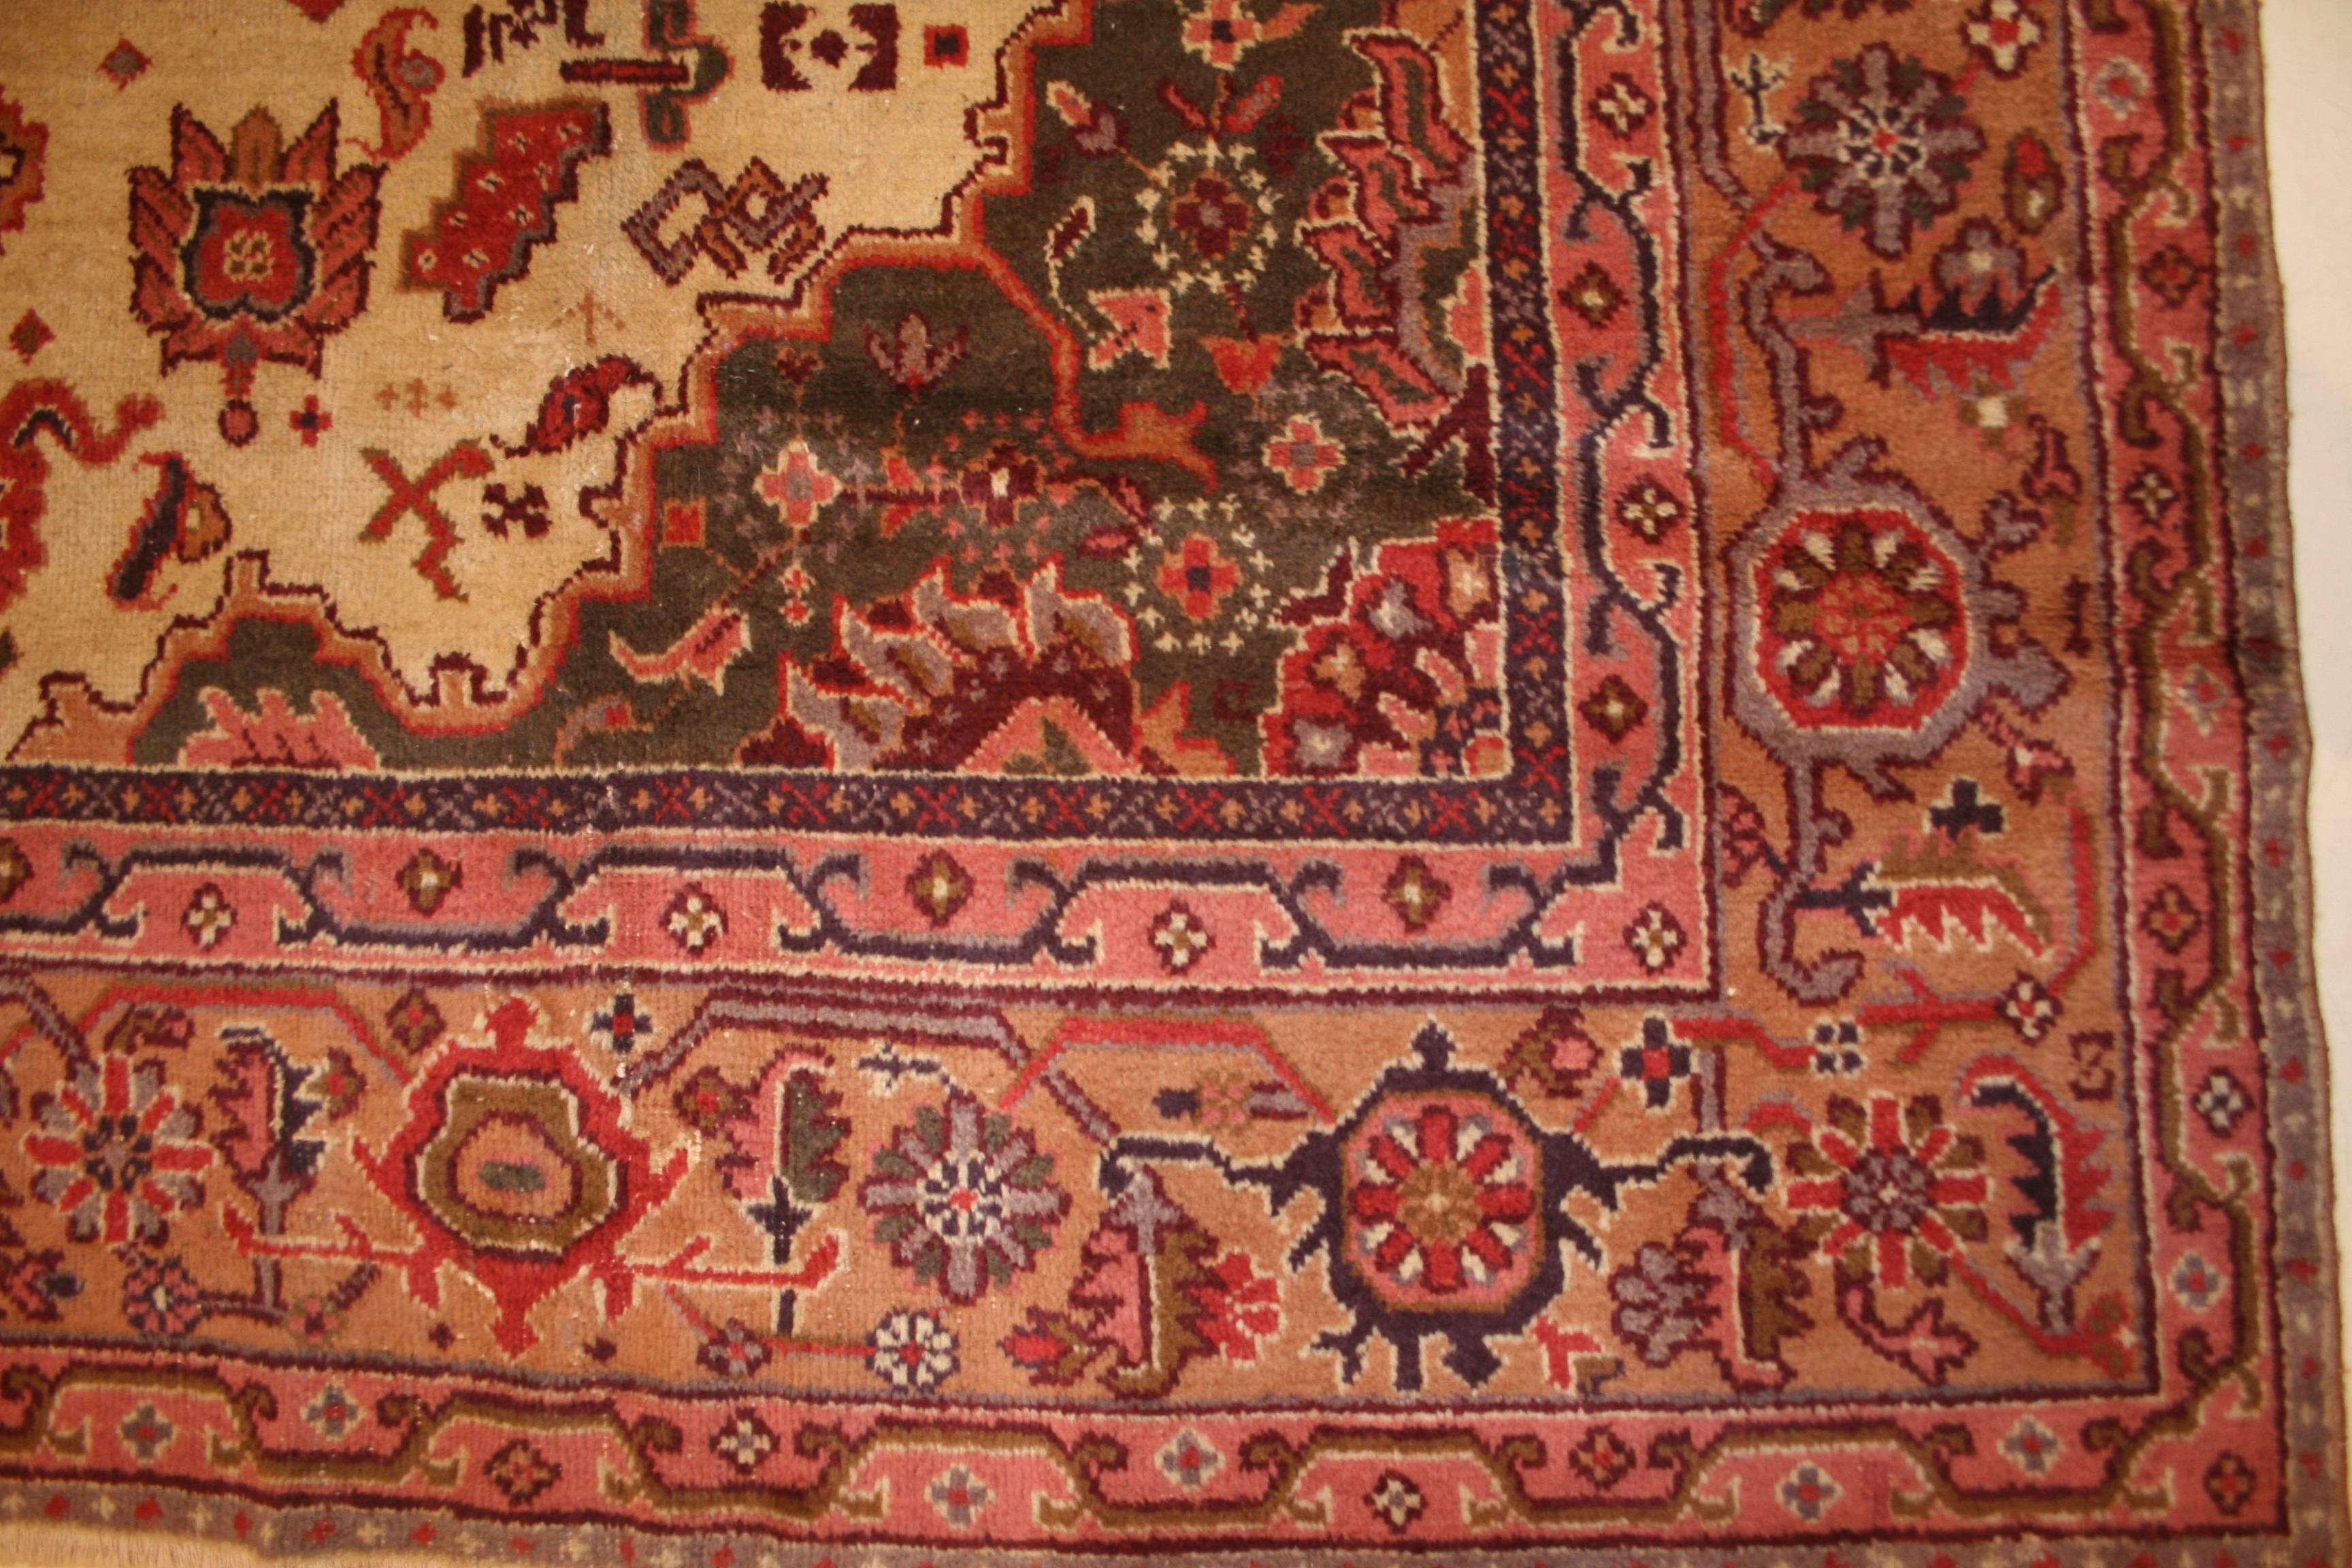 Showing a Persianate pattern composed of a central medallion with quartered medallion elements in the corners, this old Turkish rug is distinguished by an ivory background and by a rich palette of decorative shades of eggplant, soft corals, peach